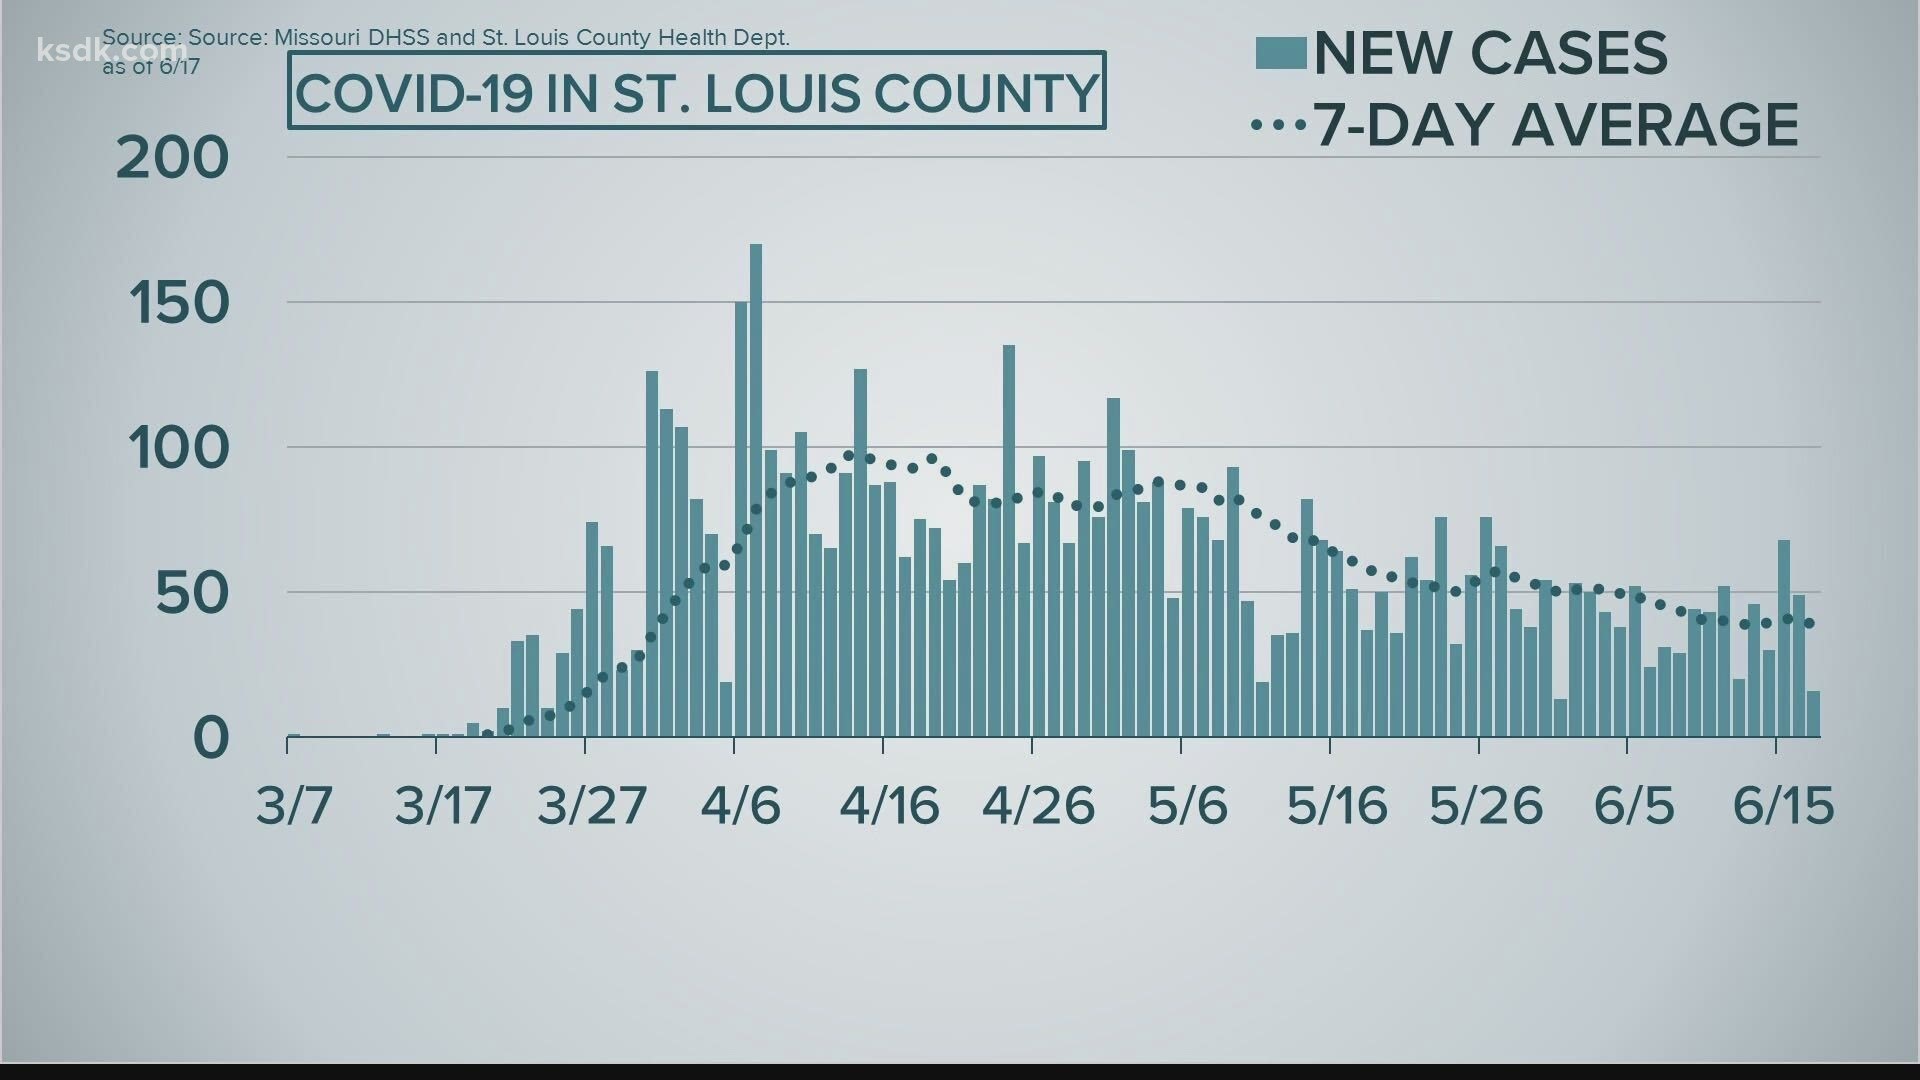 While other parts of the state are seeing the highest increases of the pandemic, the St. Louis area has seen a steady decline